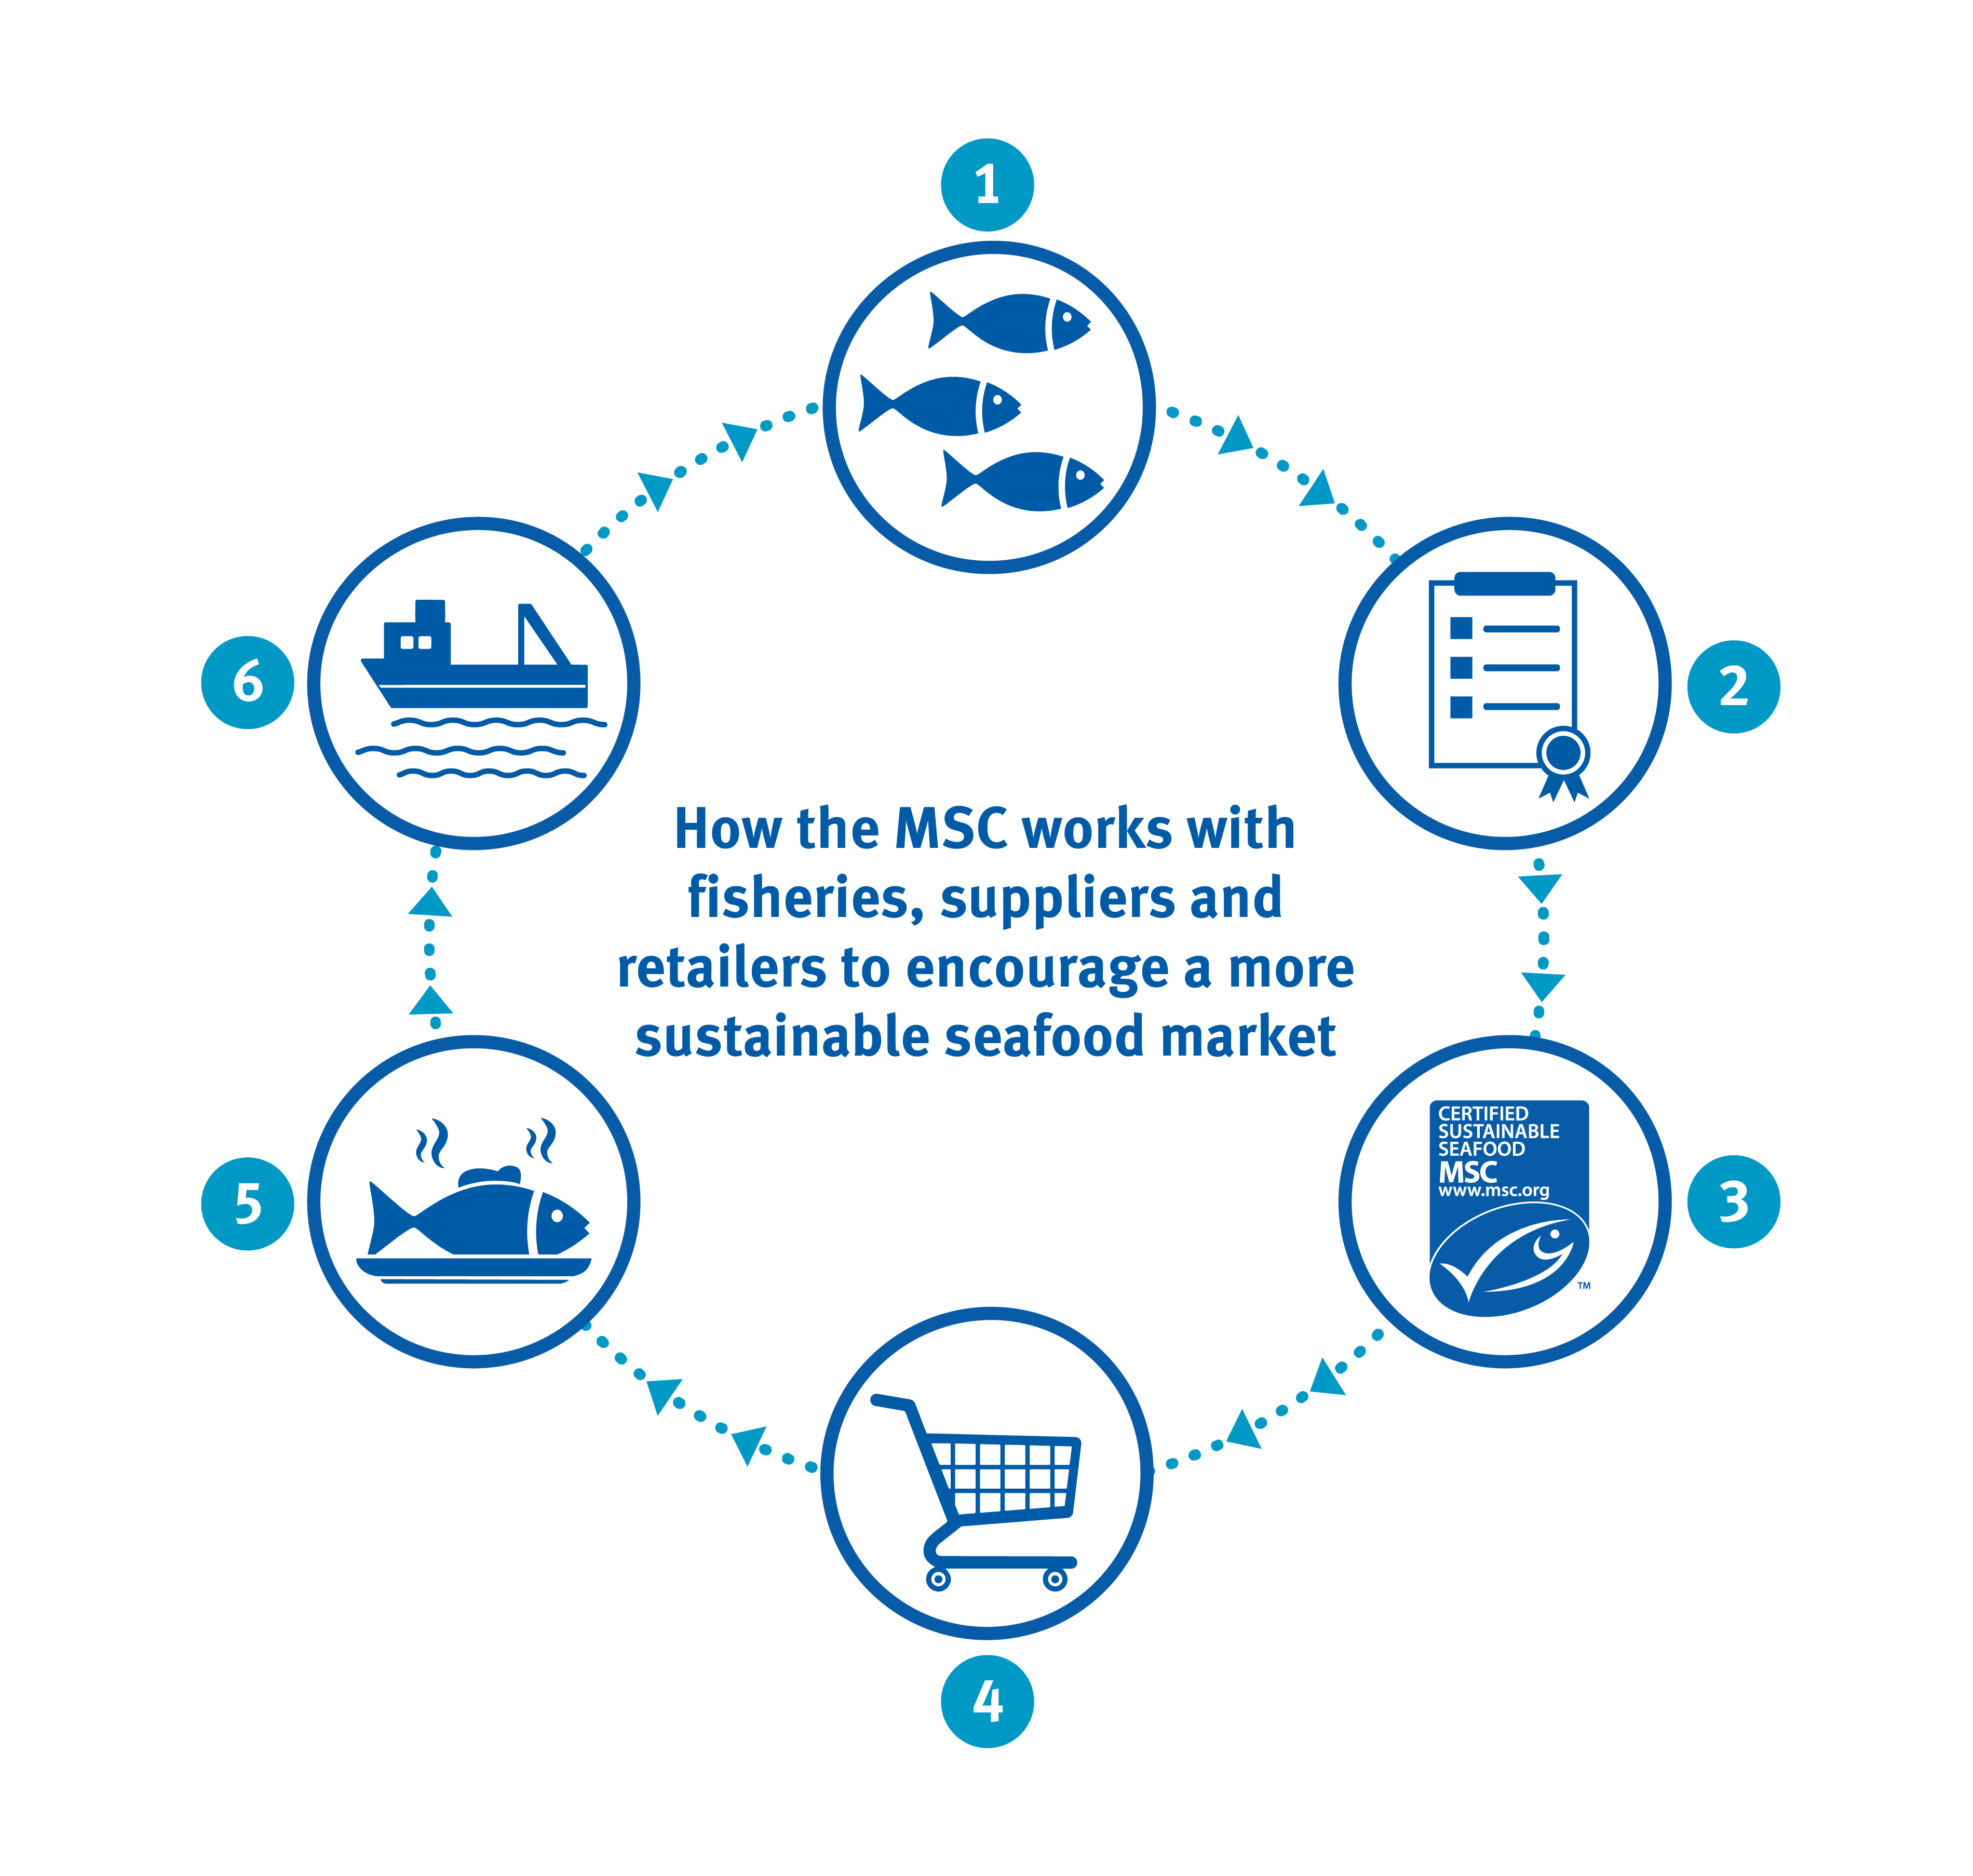 Infographic showing how the MSC works with fisheries suppliers and retailer to encourage a more sustainable seafood market